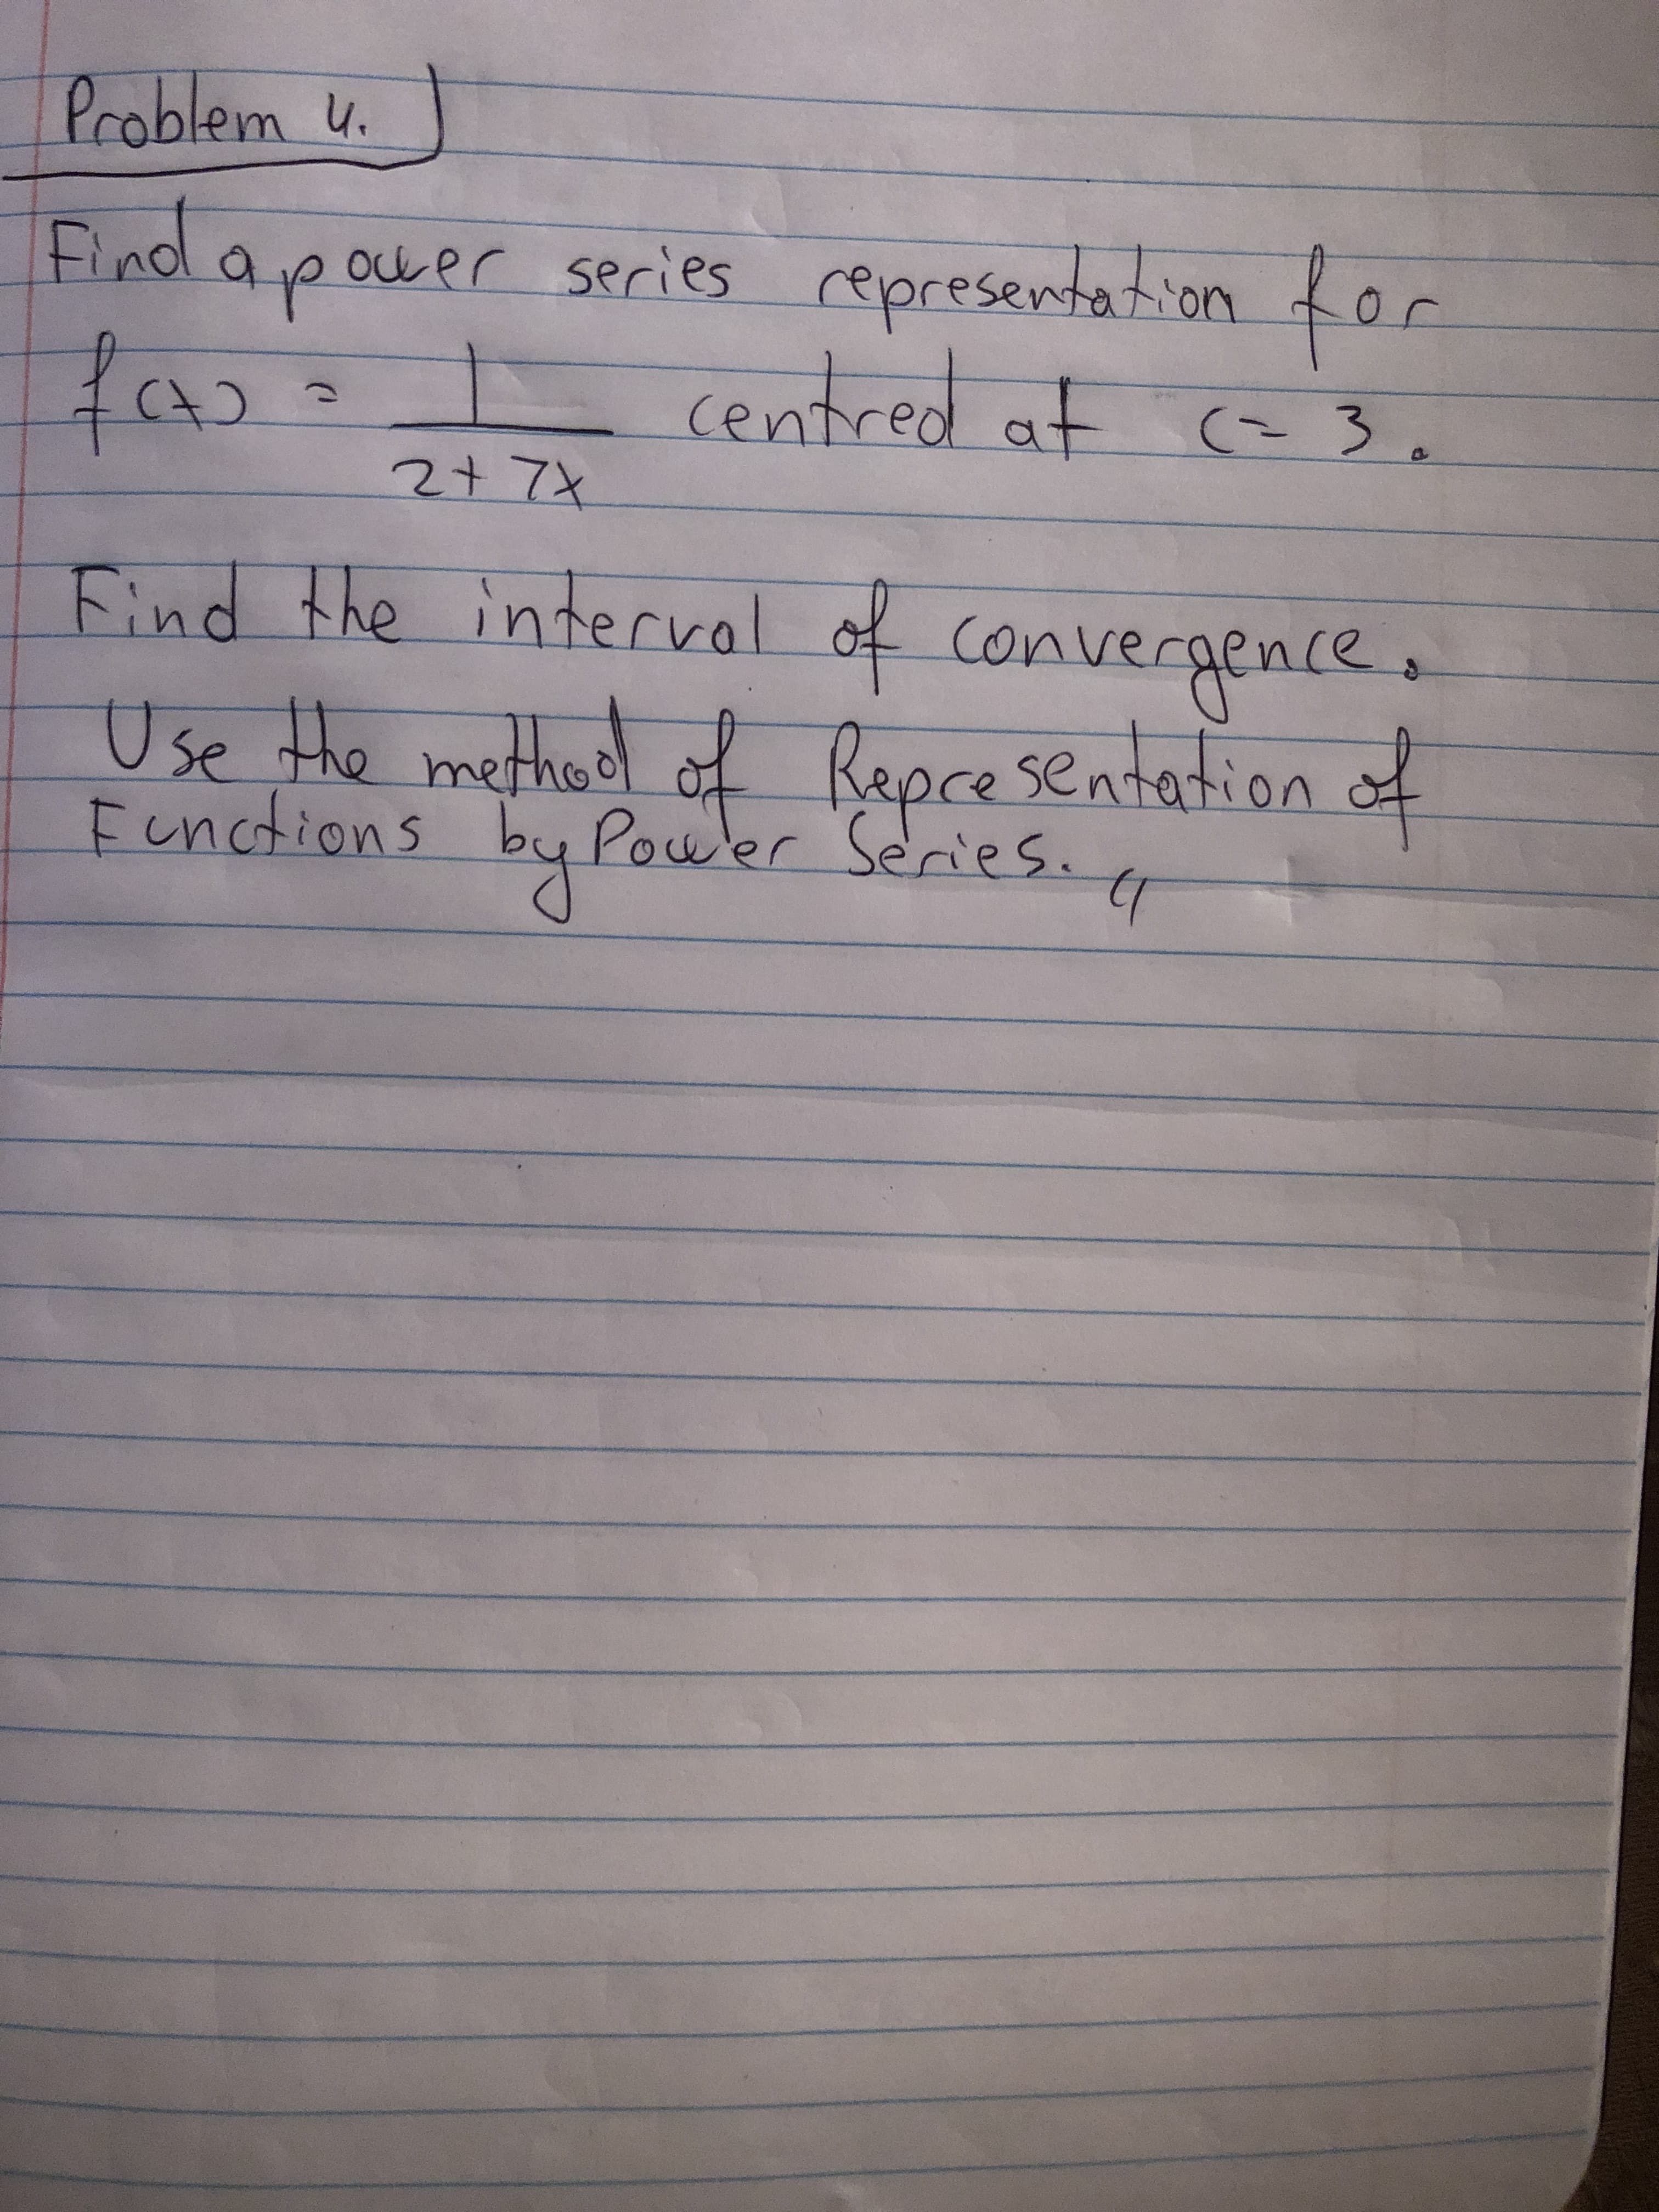 Find apouer series representation for
for
ocrer series
Centred at ca 3.
2+7x
Find the l of convergence.
interval
Use the methed of Repcesentation d
Functions by
of
Power Series.
